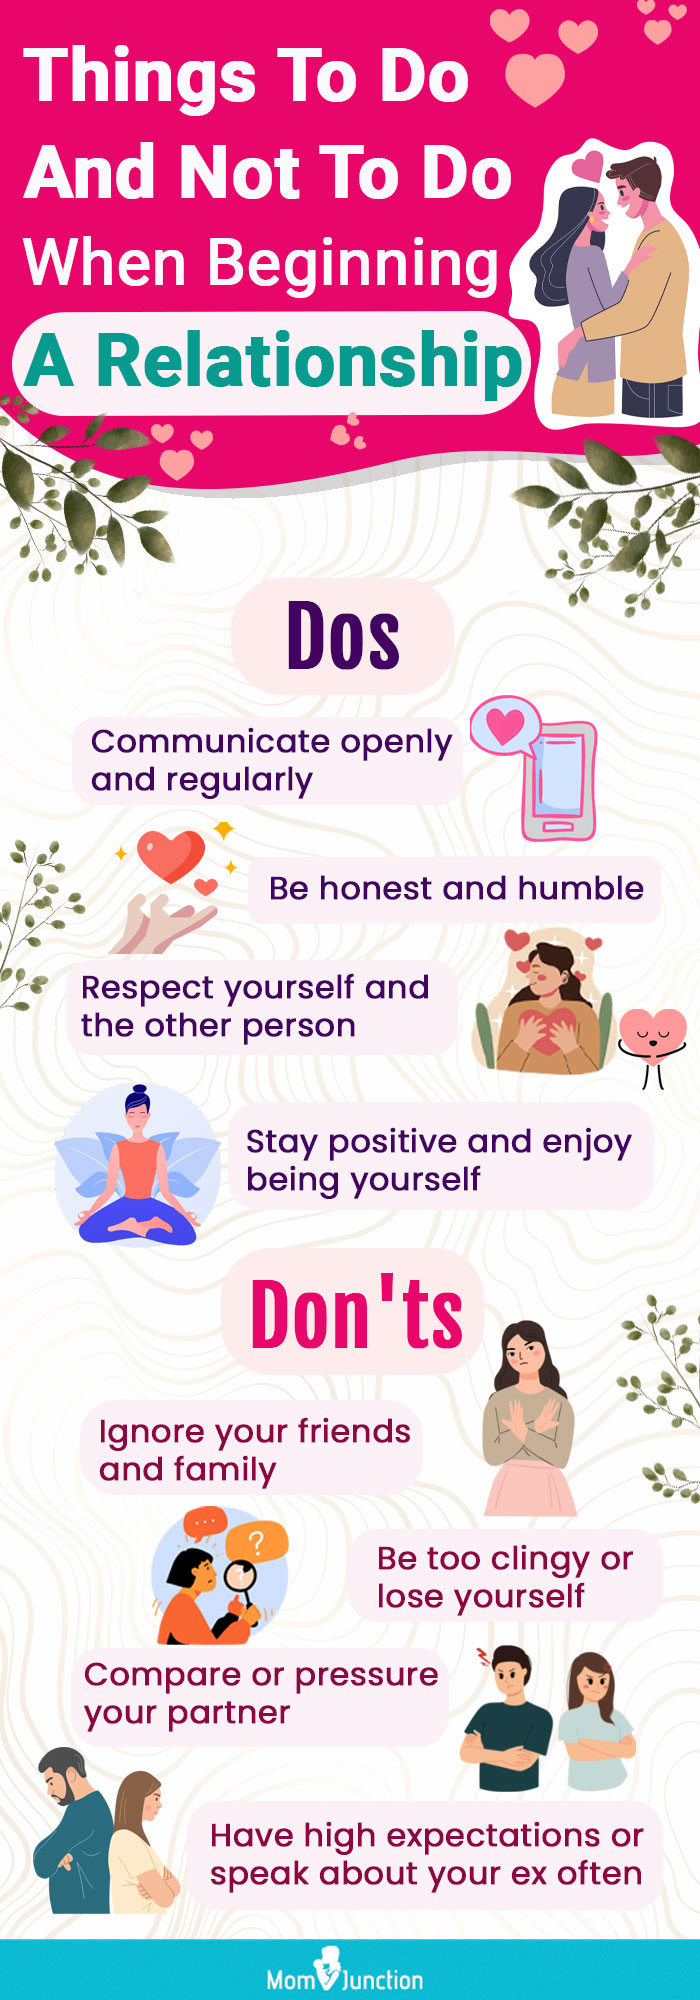 things to do and not to do when beginning a relationship (infographic)